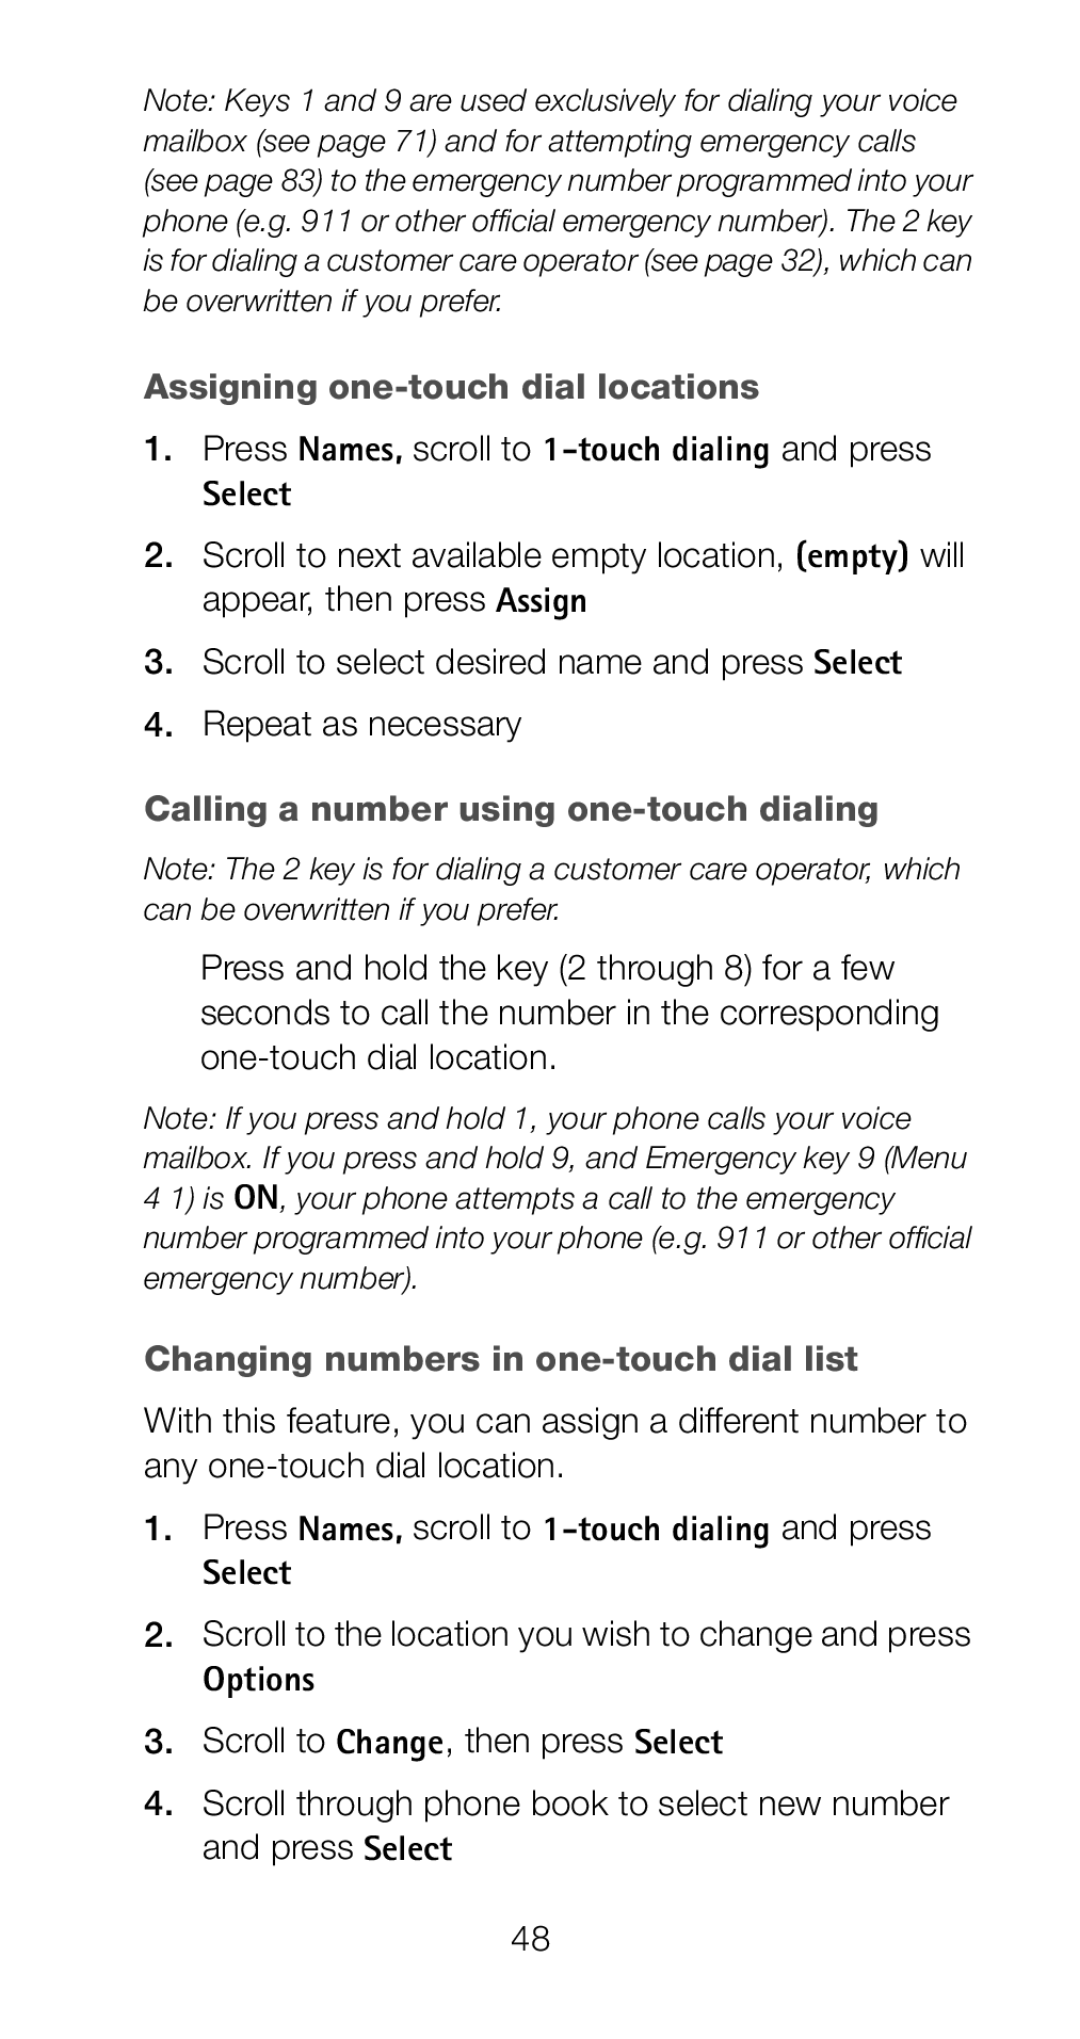 Nokia 6161i owner manual Assigning one-touch dial locations, Calling a number using one-touch dialing, Options 